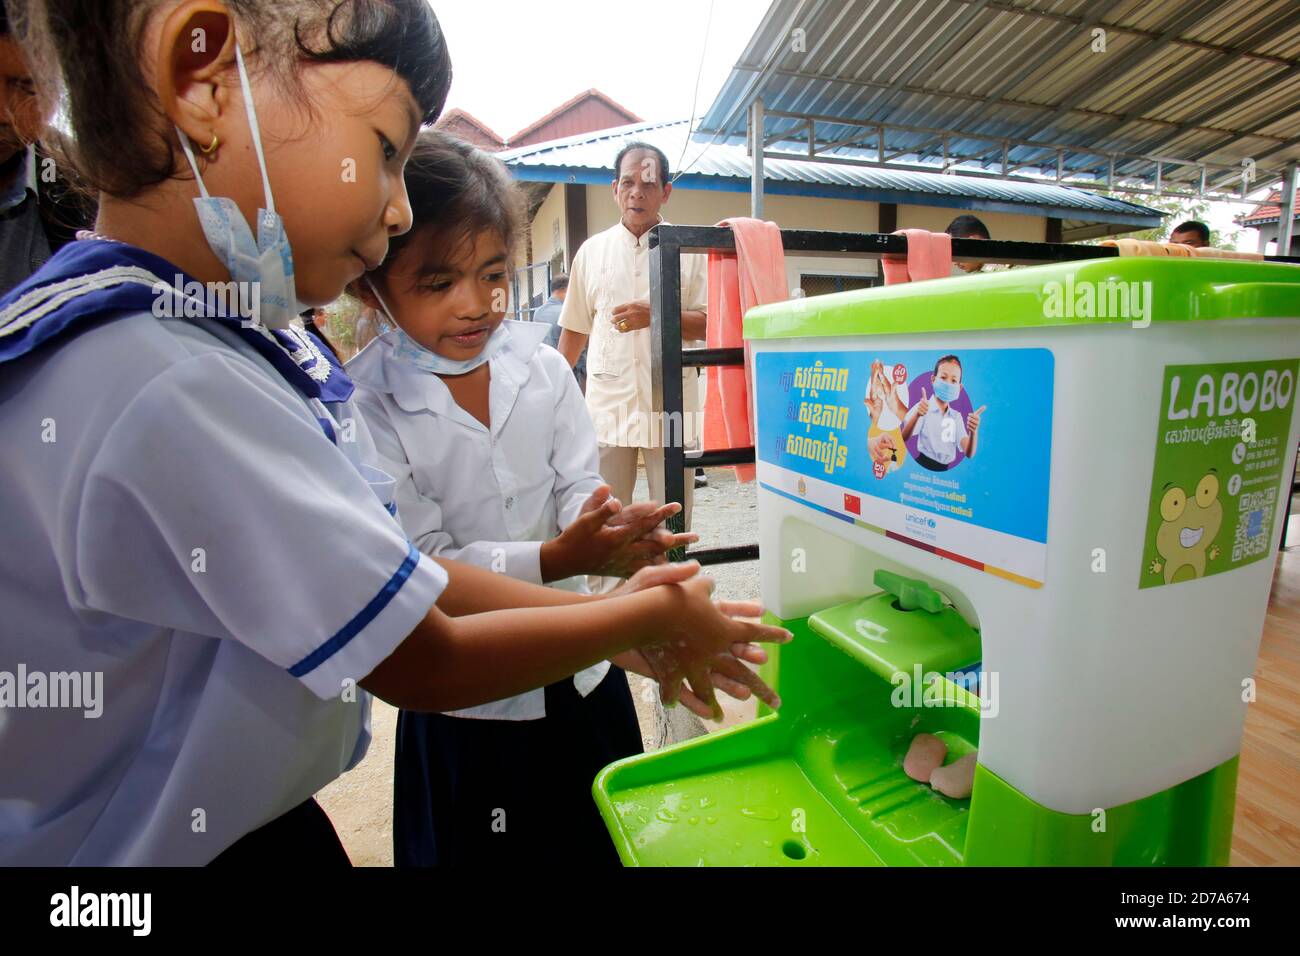 Phnom Penh, Phnom Penh. 21st Oct, 2020. Children wash their hands at a China-donated portable handwashing facility at the Trapeang Thlan Village community pre-school in Prek Pnov district, Phnom Penh, Cambodia on Oct. 21, 2020. China, through the United Nations Children's Fund (UNICEF), has provided hygiene and learning supplies to 3,064 community pre-schools across Cambodia, allowing some 70,000 children to return to school safely, with better protection from the COVID-19. Credit: Sovannara/Xinhua/Alamy Live News Stock Photo